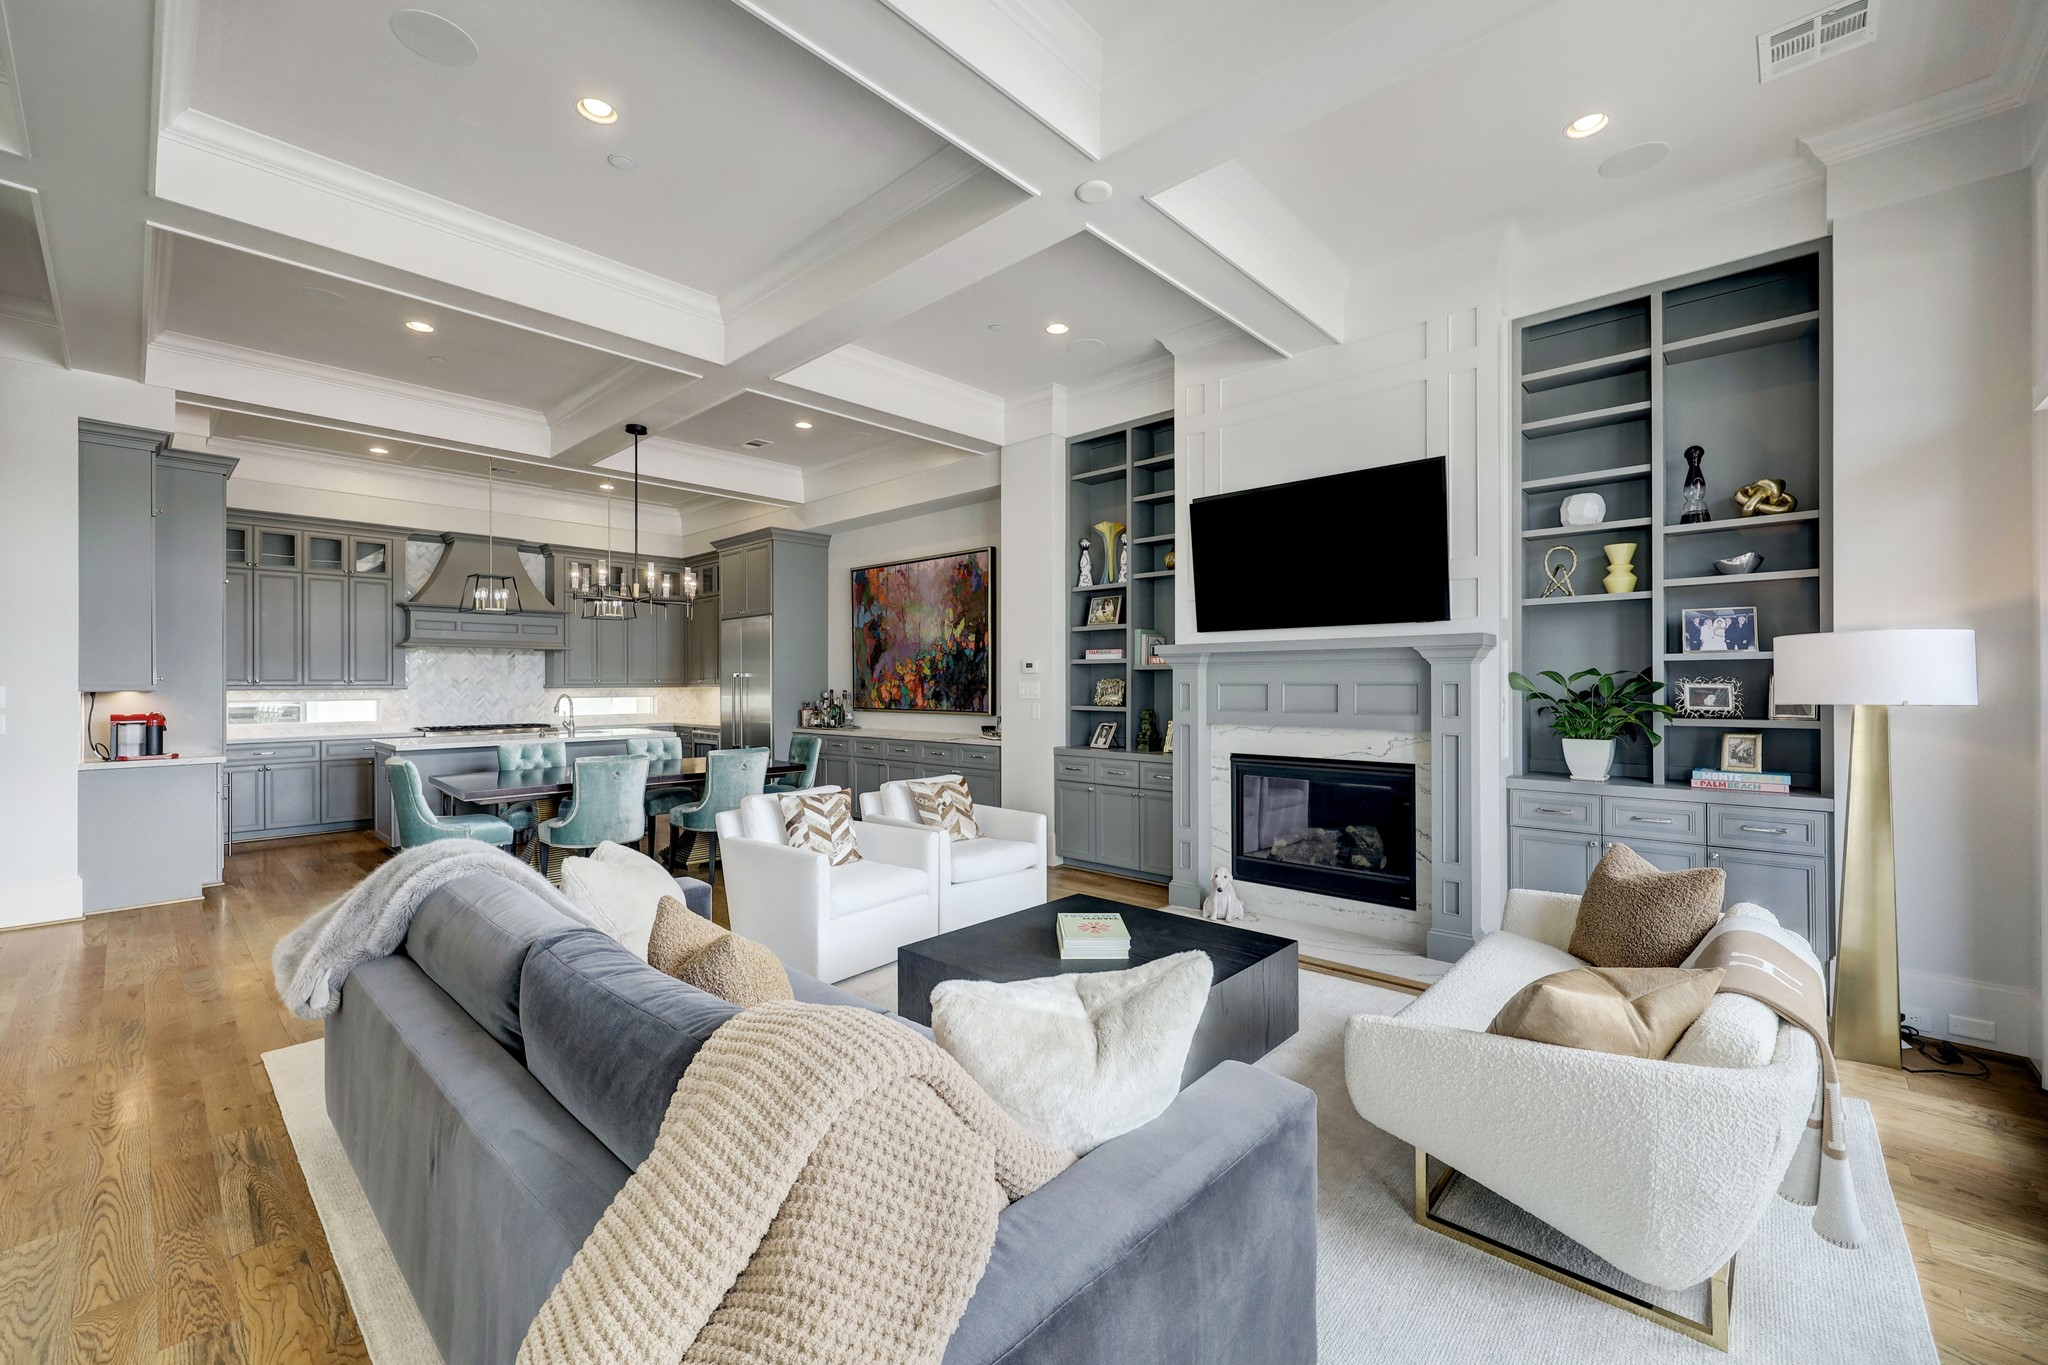 This beautiful open concept living room features a fireplace, coffered ceiling, and built-in shelving and cabinets.